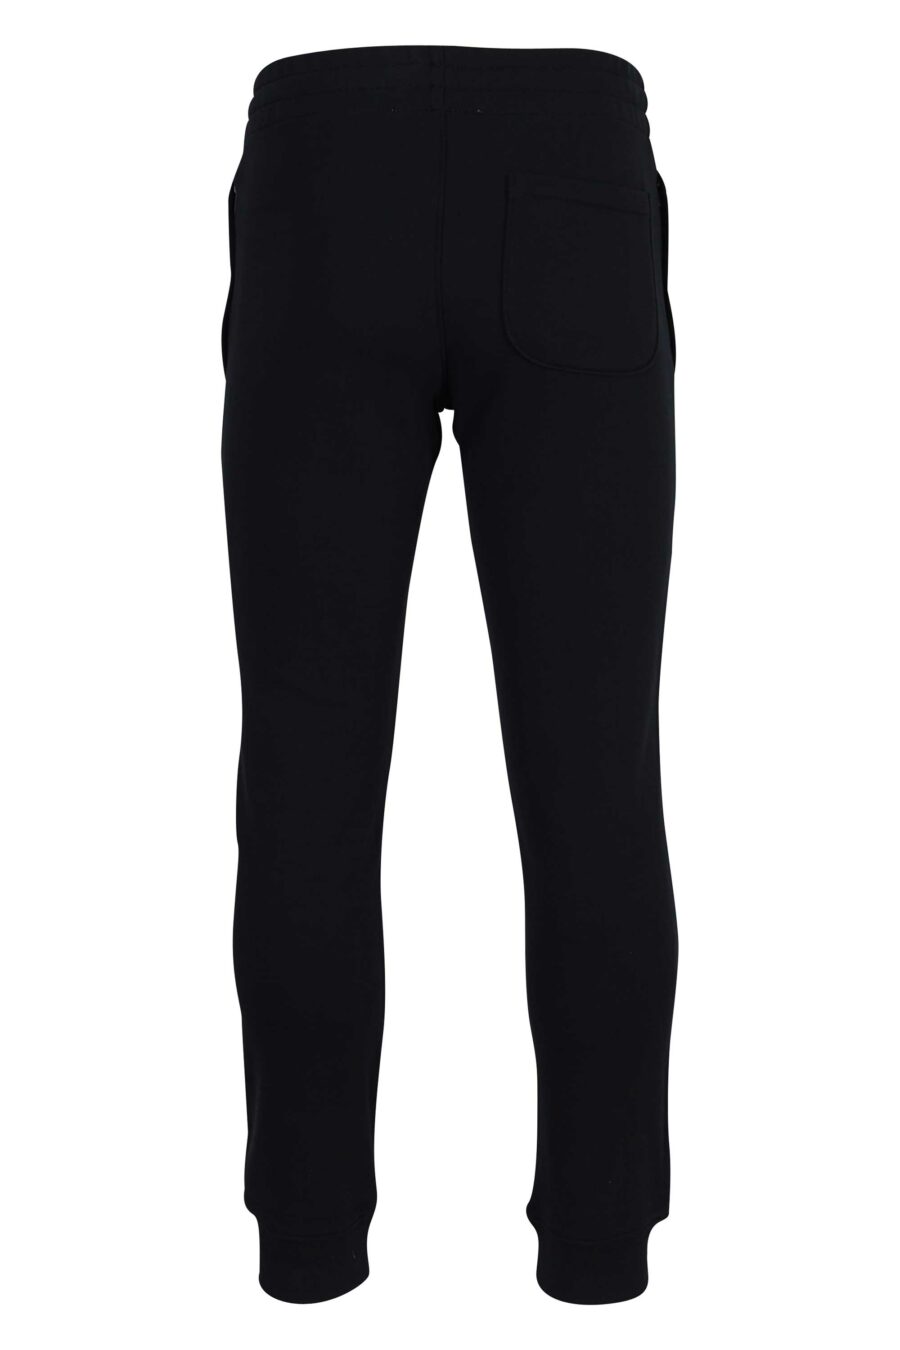 Tracksuit bottoms black with logo "teddy tailor" - 667113124759 2